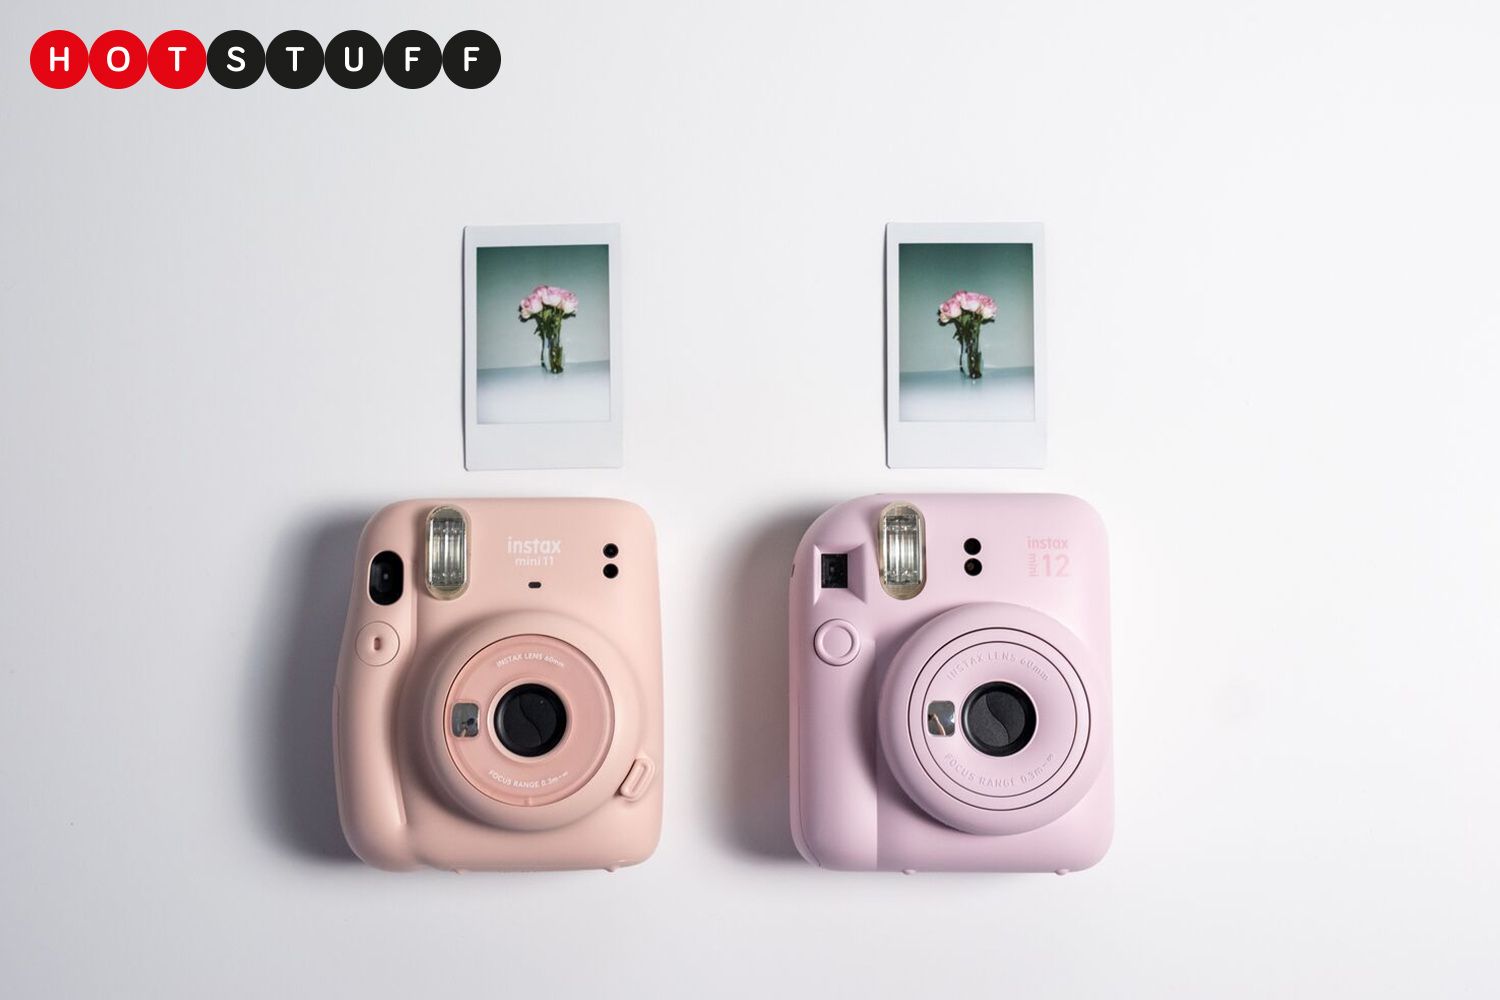 Fujifilm Instax Mini 12 Features New Design and Improved Functionality